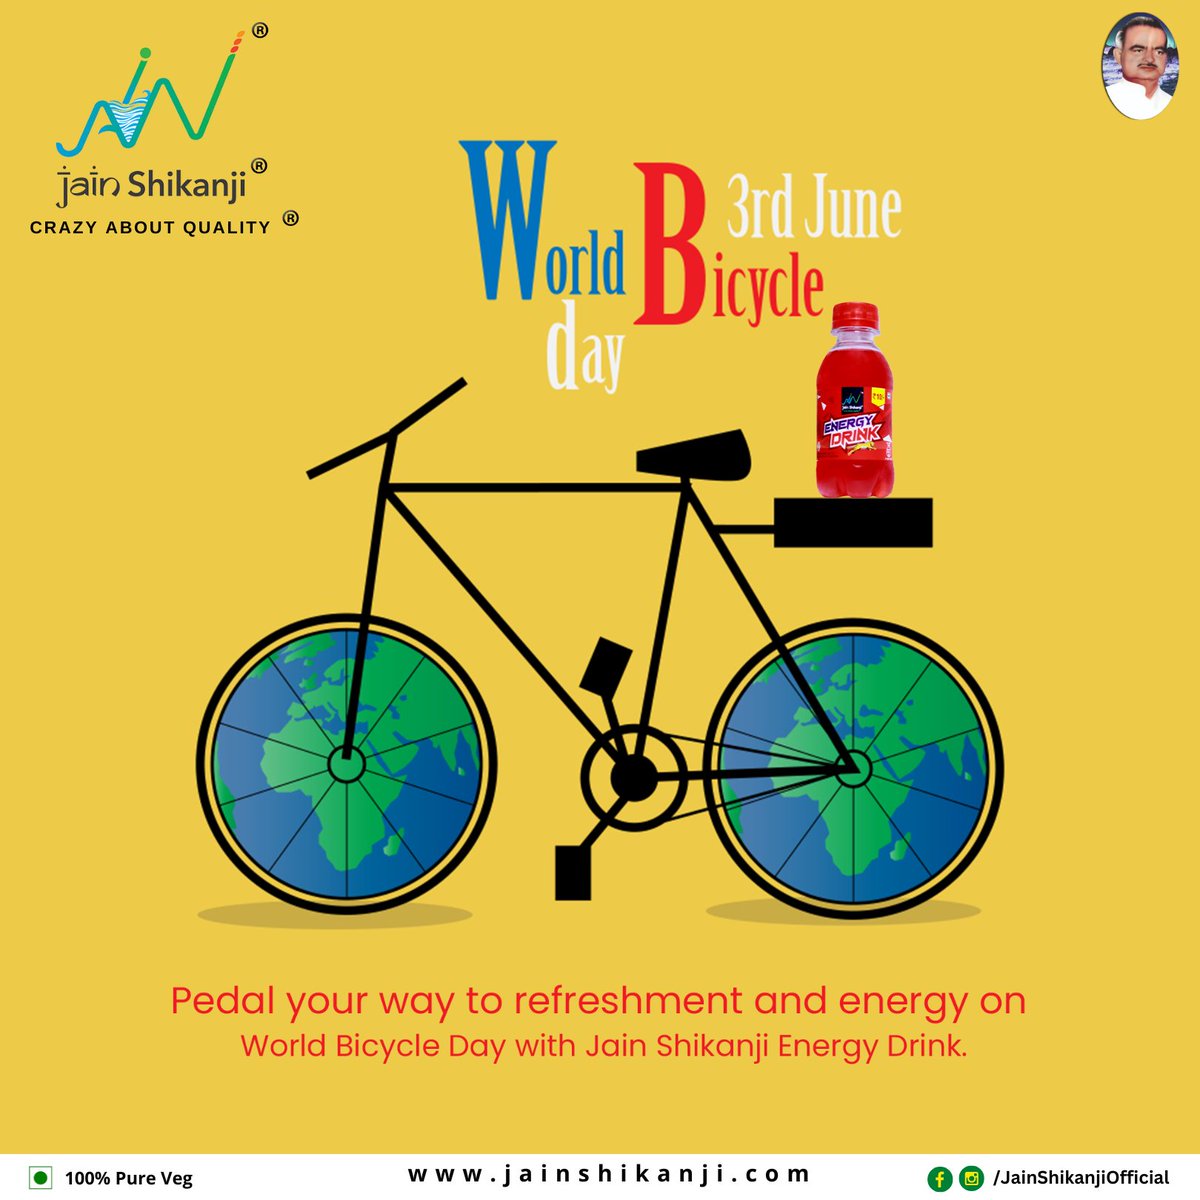 Quench your thirst, revitalize your body, and feel the invigorating power of Jain Shikanji Energy Drink, fueling your journey towards a healthier lifestyle.
#WorldBicycleDay #CyclingAdventures #JainShikanji #RefreshmentOnTheGo #EnergizeYourRide #QuenchYourThirst